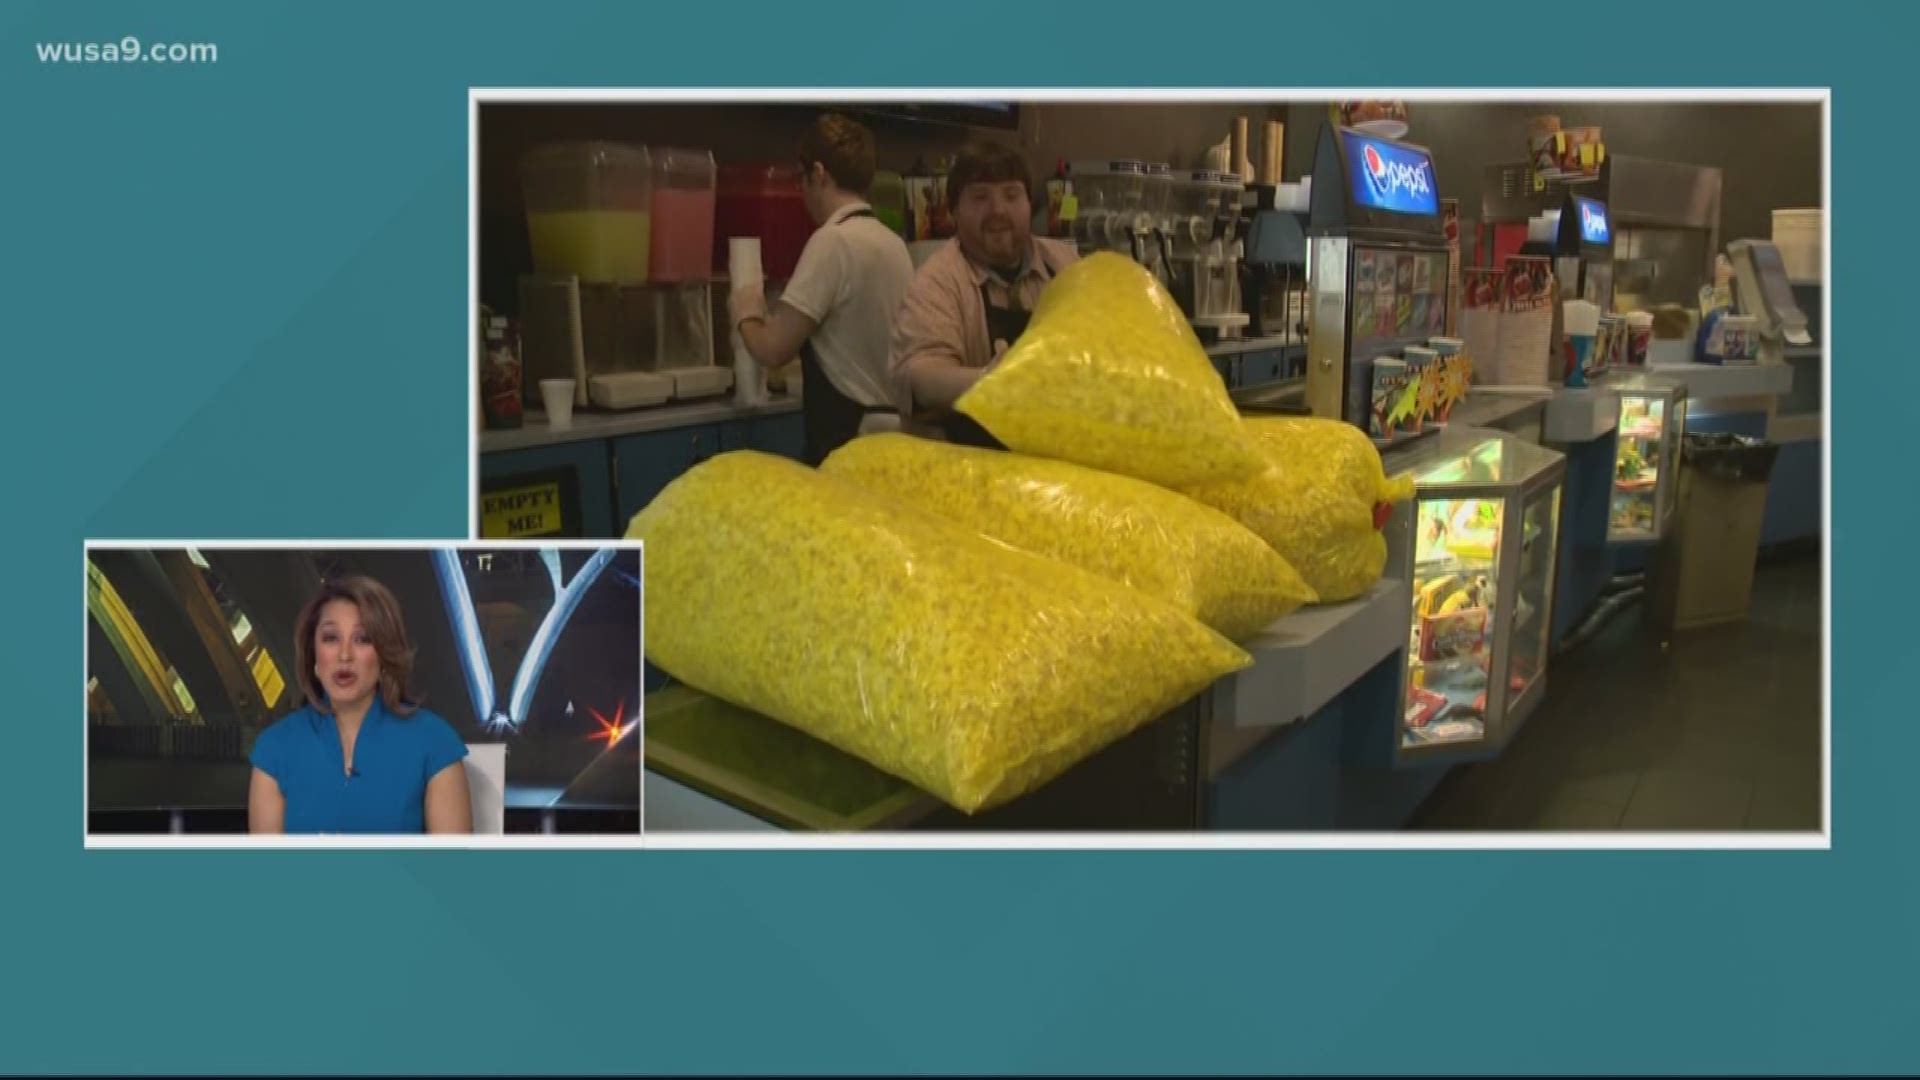 This theater owner can't sell movie tickets, so he's selling sidewalk popcorn instead.